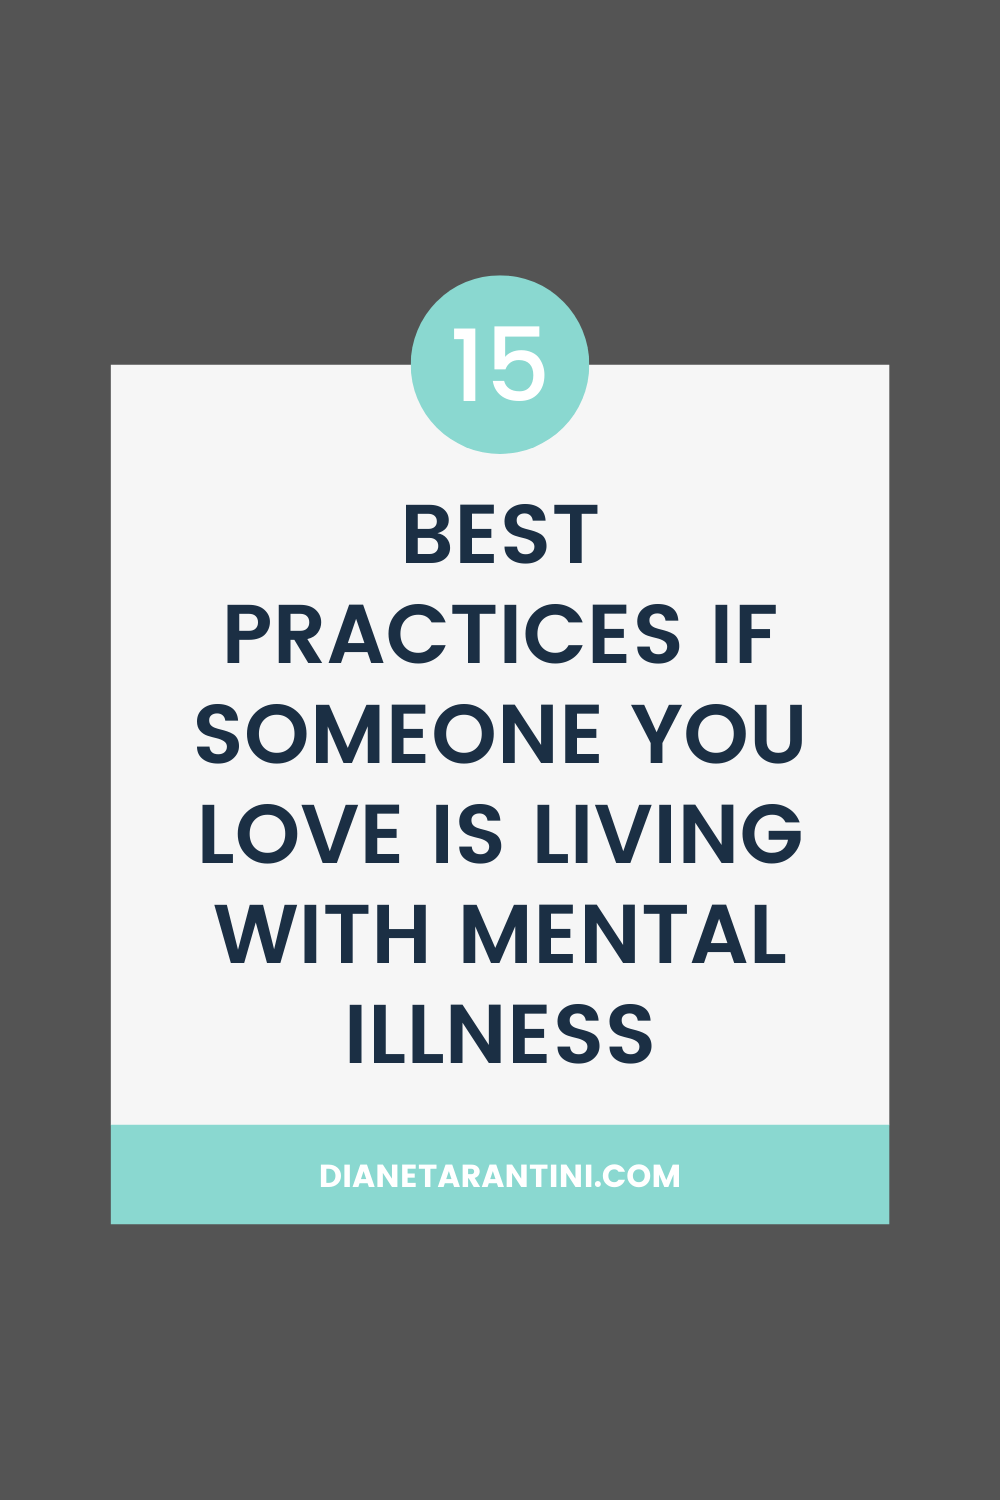 How to live with someone with mental illness - tips for helping someone with mental illness